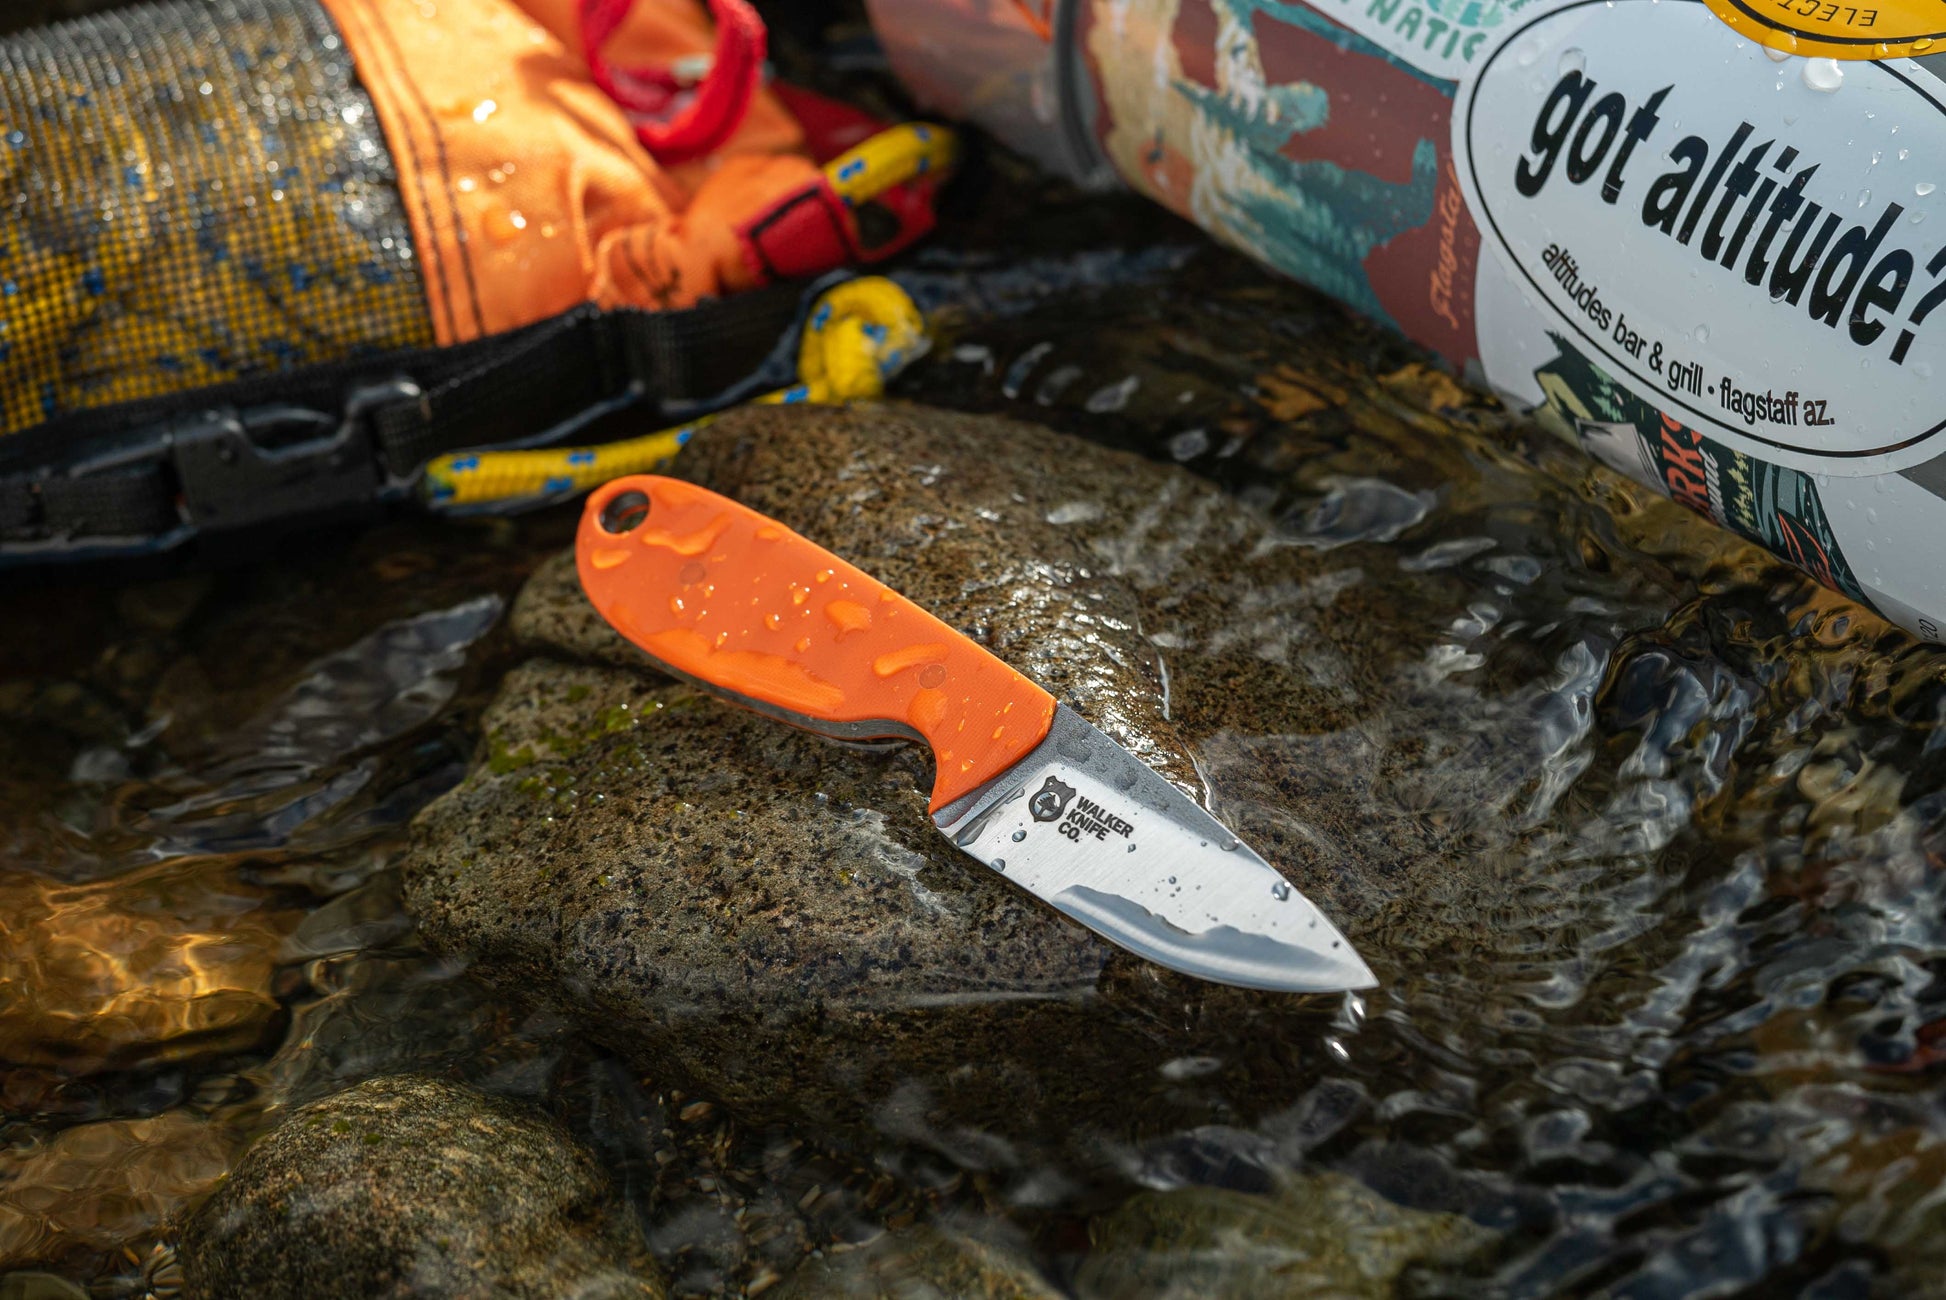 440C stainless steel river knife depicted in the water with river gear